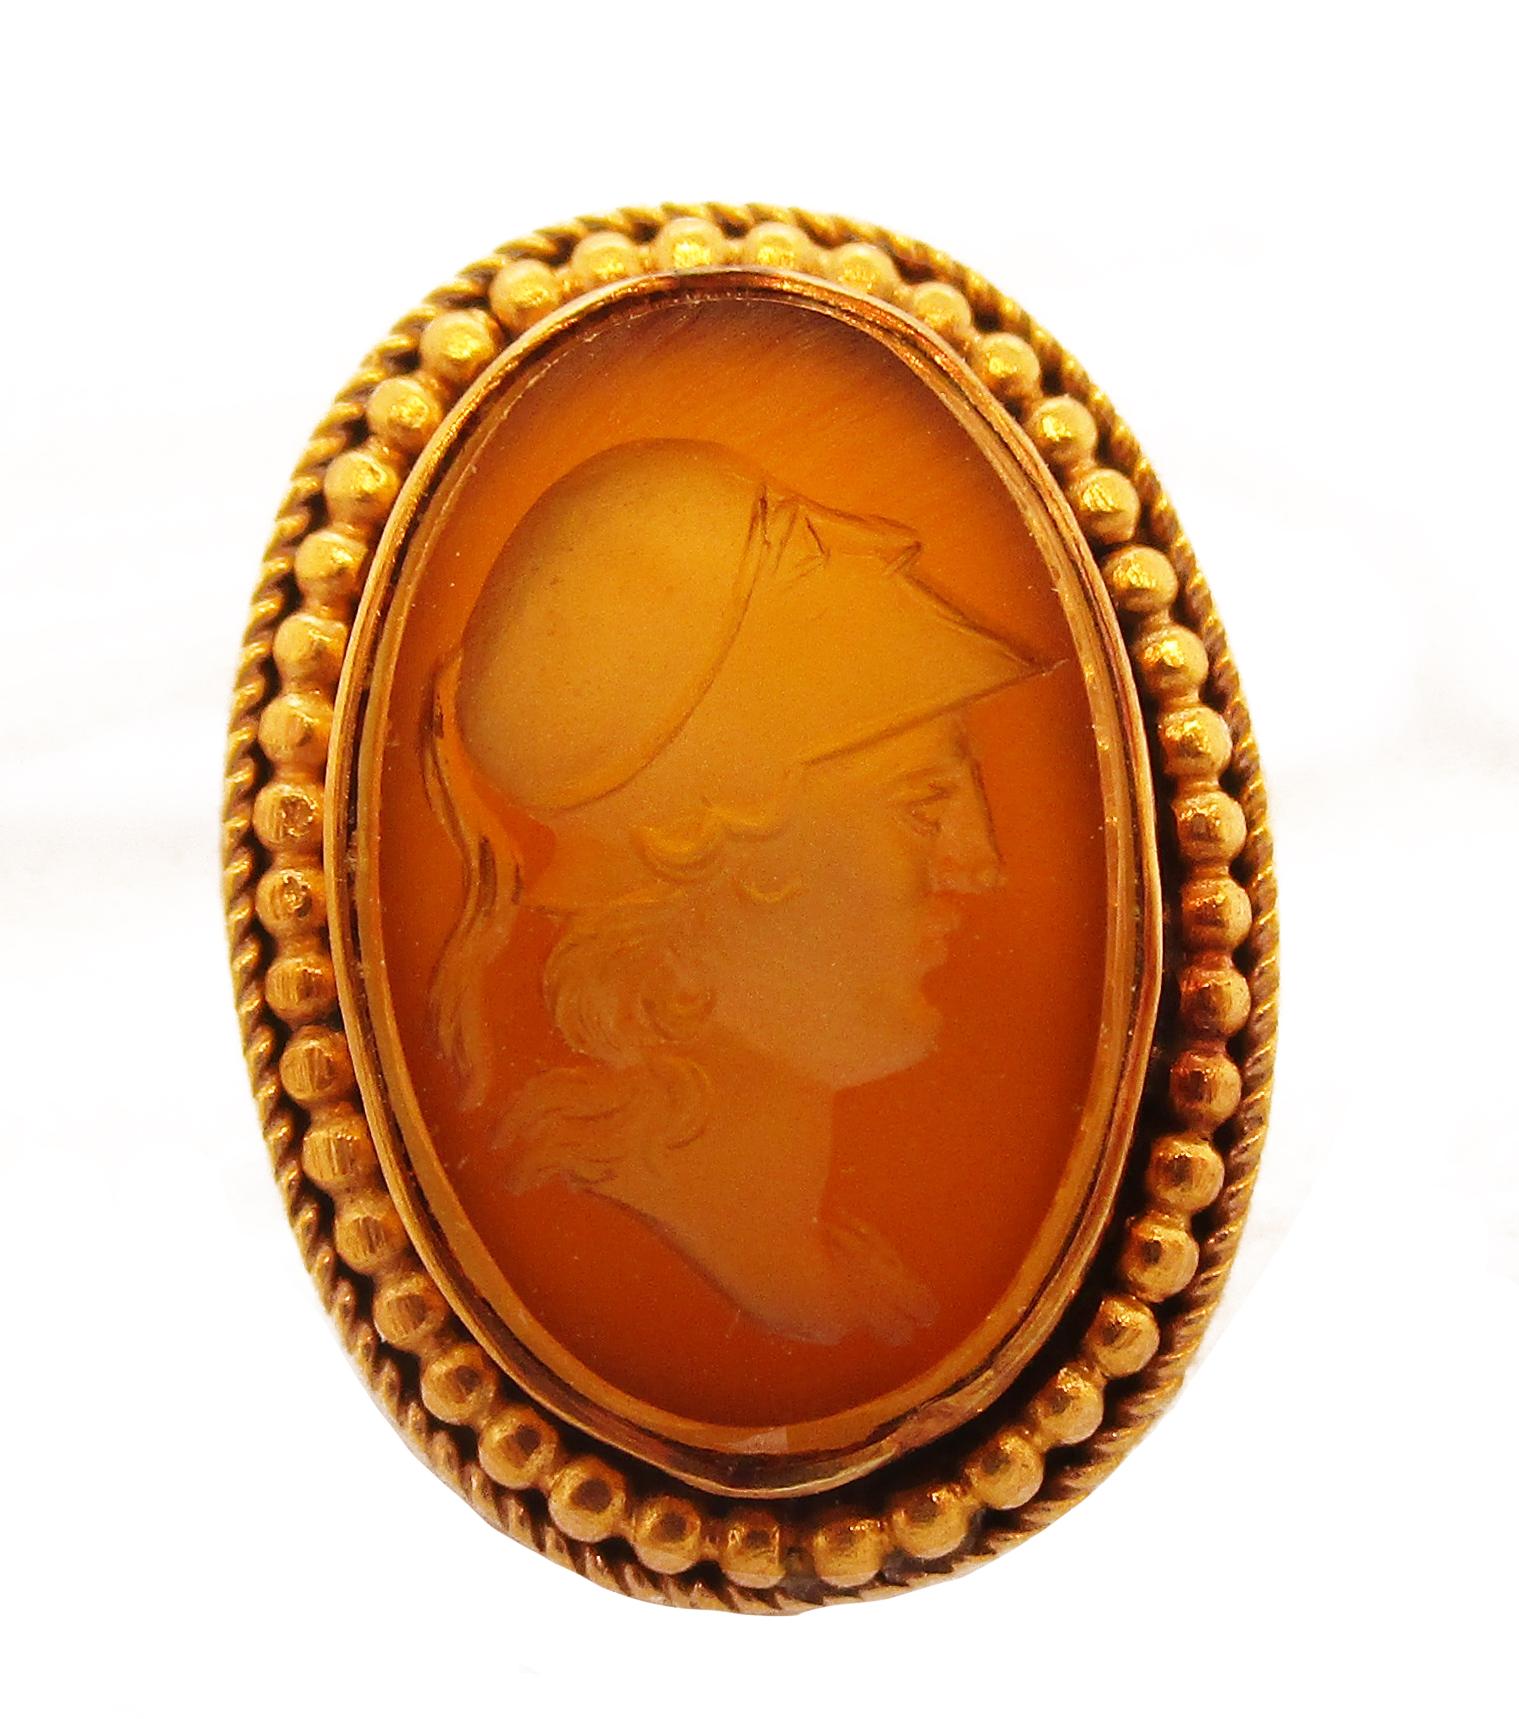 This stunning set of Victorian cufflinks boast a rich, dark 18k yellow gold frames and magnificent intaglio carved citrine panels. The carving features the profiles of two Greek warriors, possibly that of Achilles and Hector, separated only by the